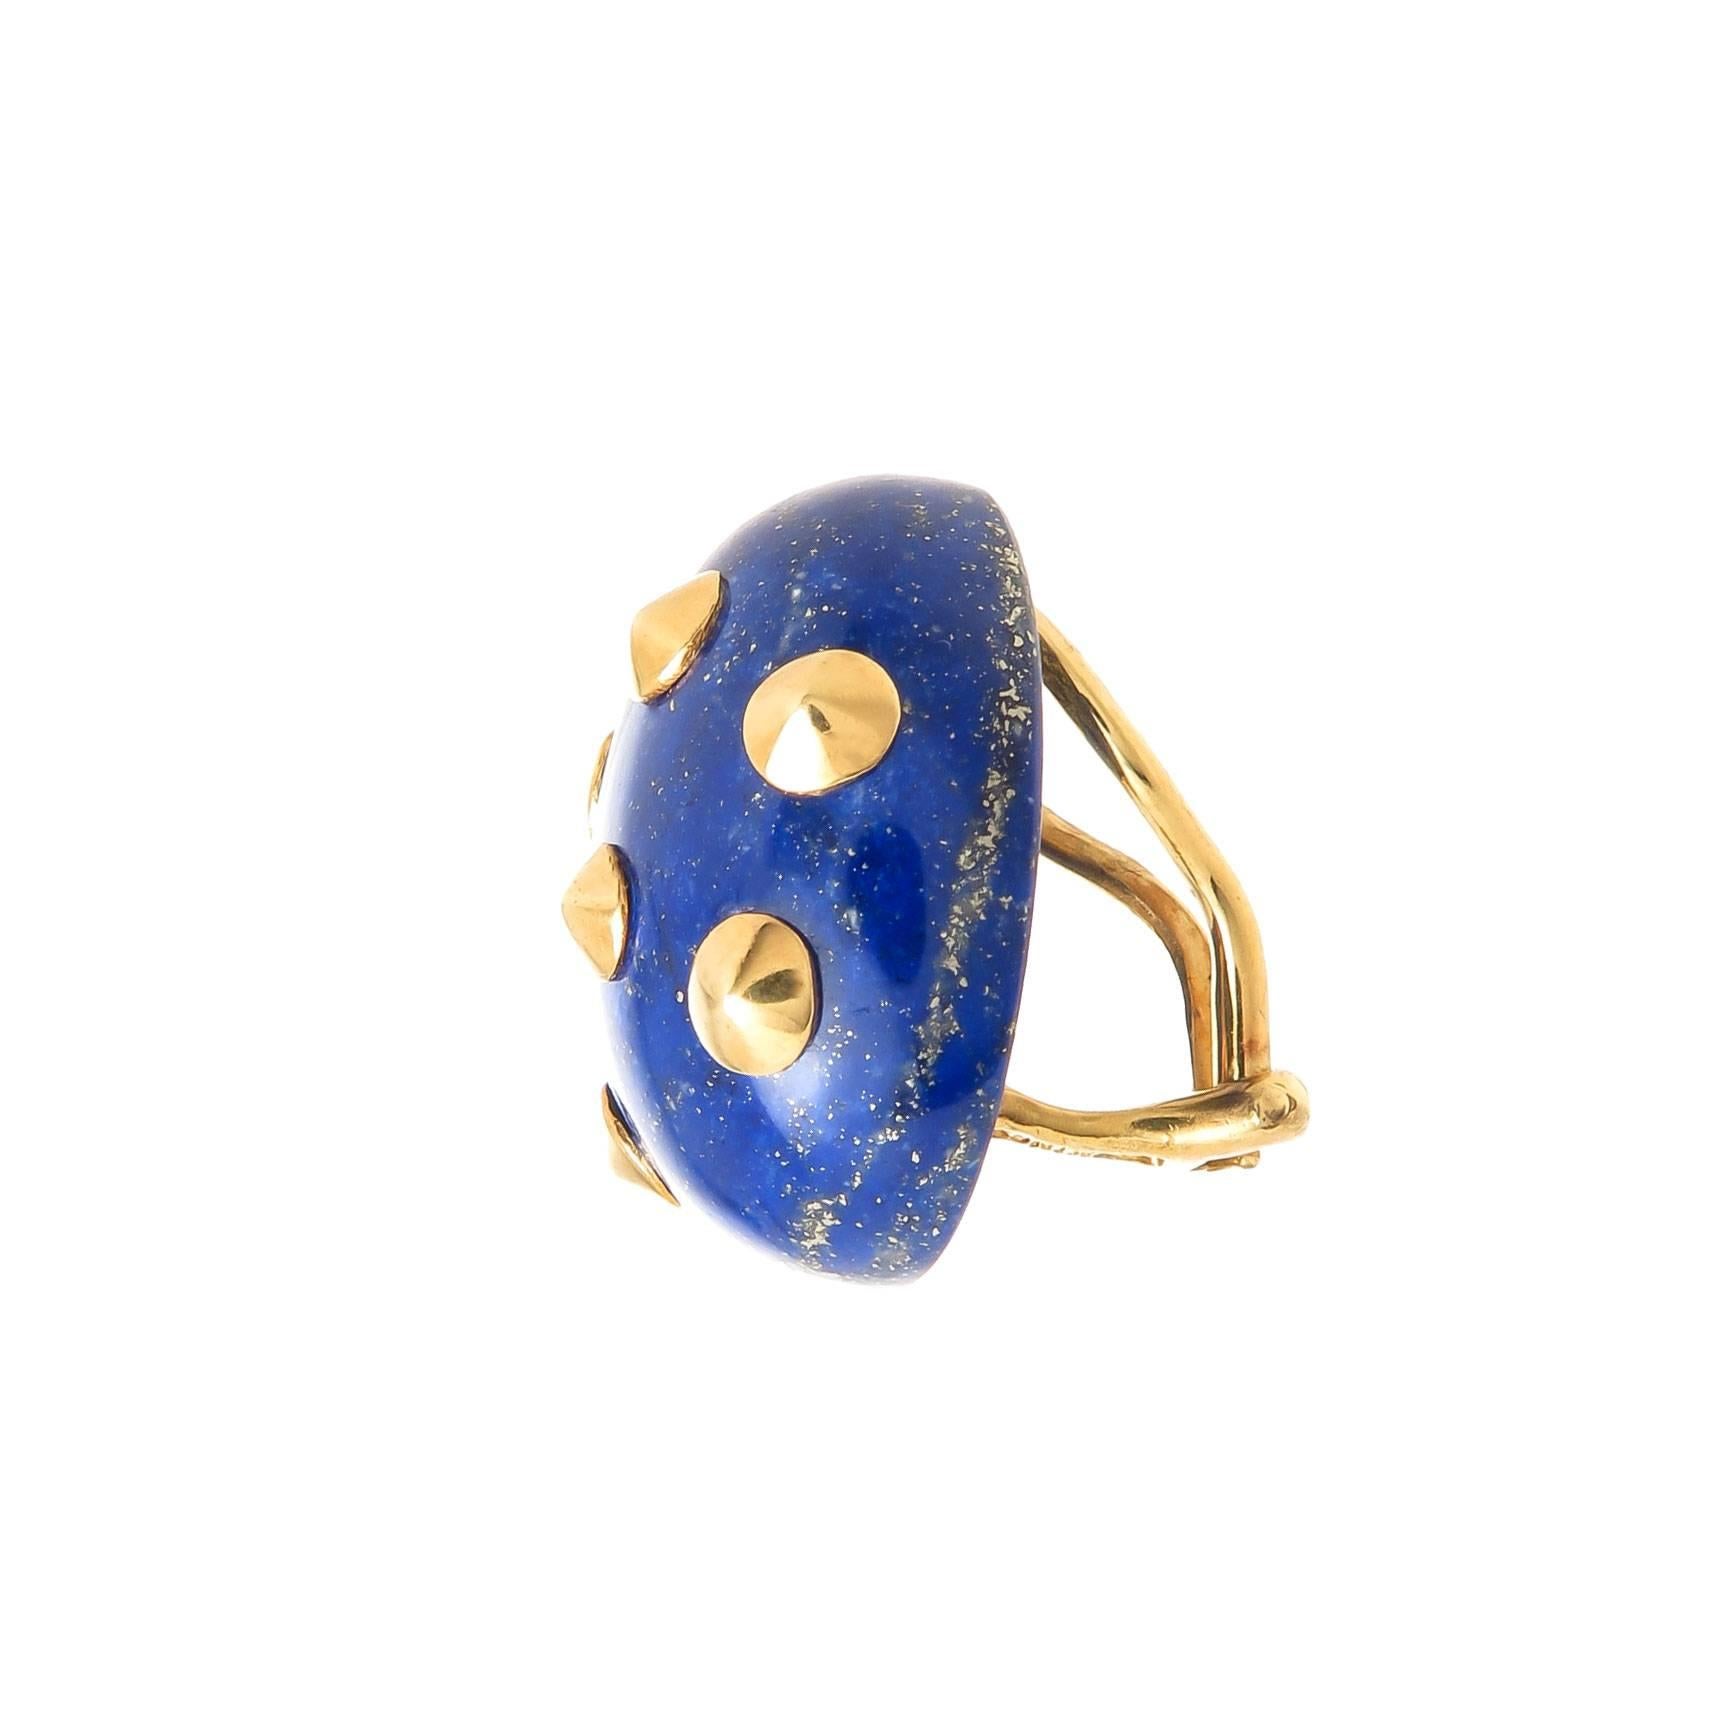 Circa 1990 Angela Cummings Lapis Lazuli and 18k yellow Gold Earrings measuring 1 inch in Length X 3/4 inch and 3/8 inch thick.  Having Raise Gold pieces and Omega Backs to which posts can be easily added if Desired.